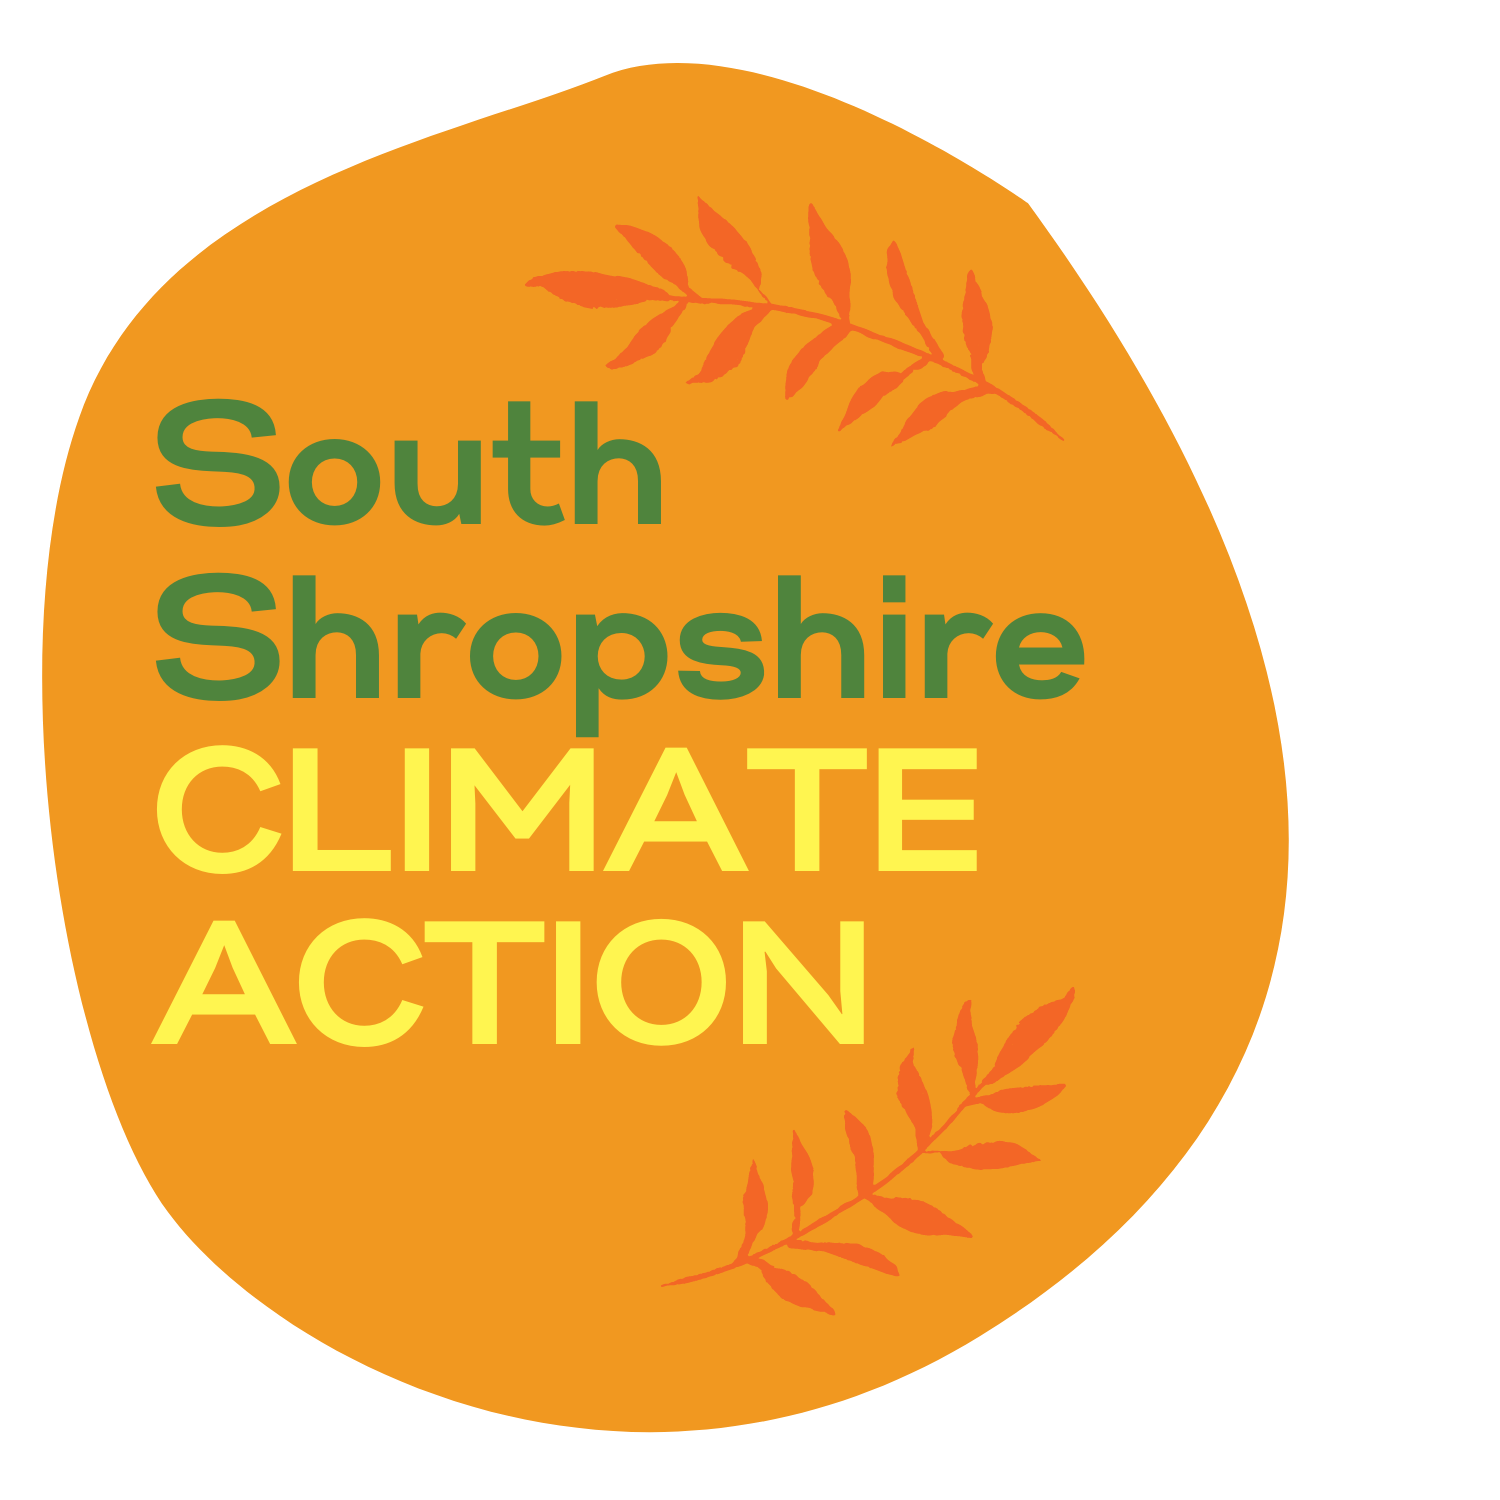 a simple logo depicting south shropshire climate action inside an orange puddle